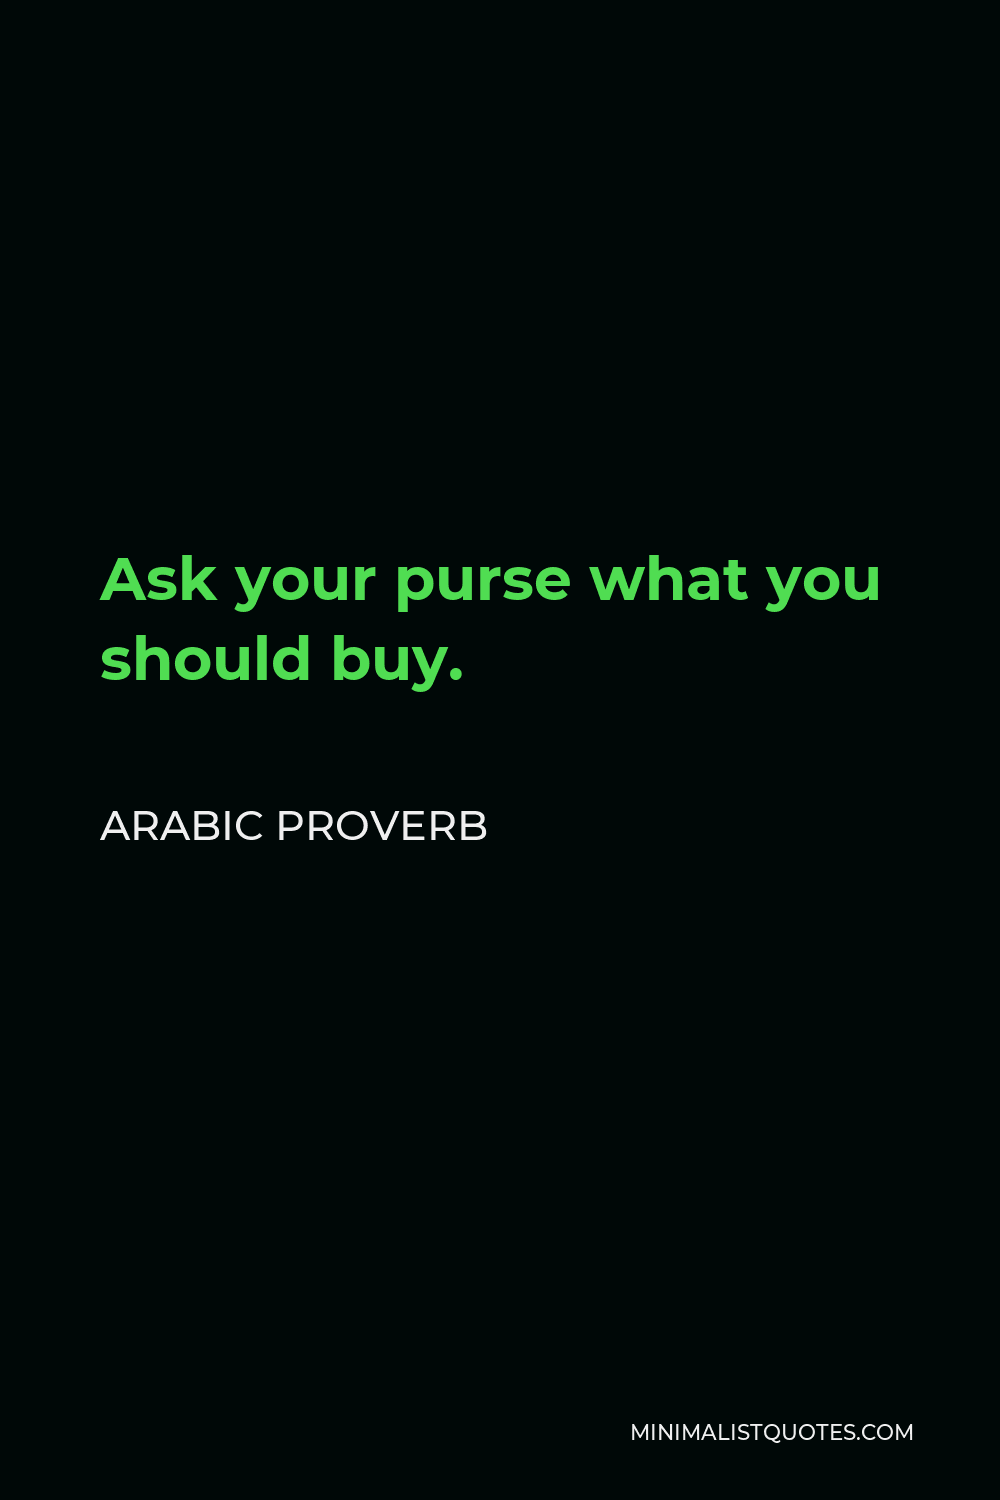 Arabic Proverb Quote - Ask your purse what you should buy.